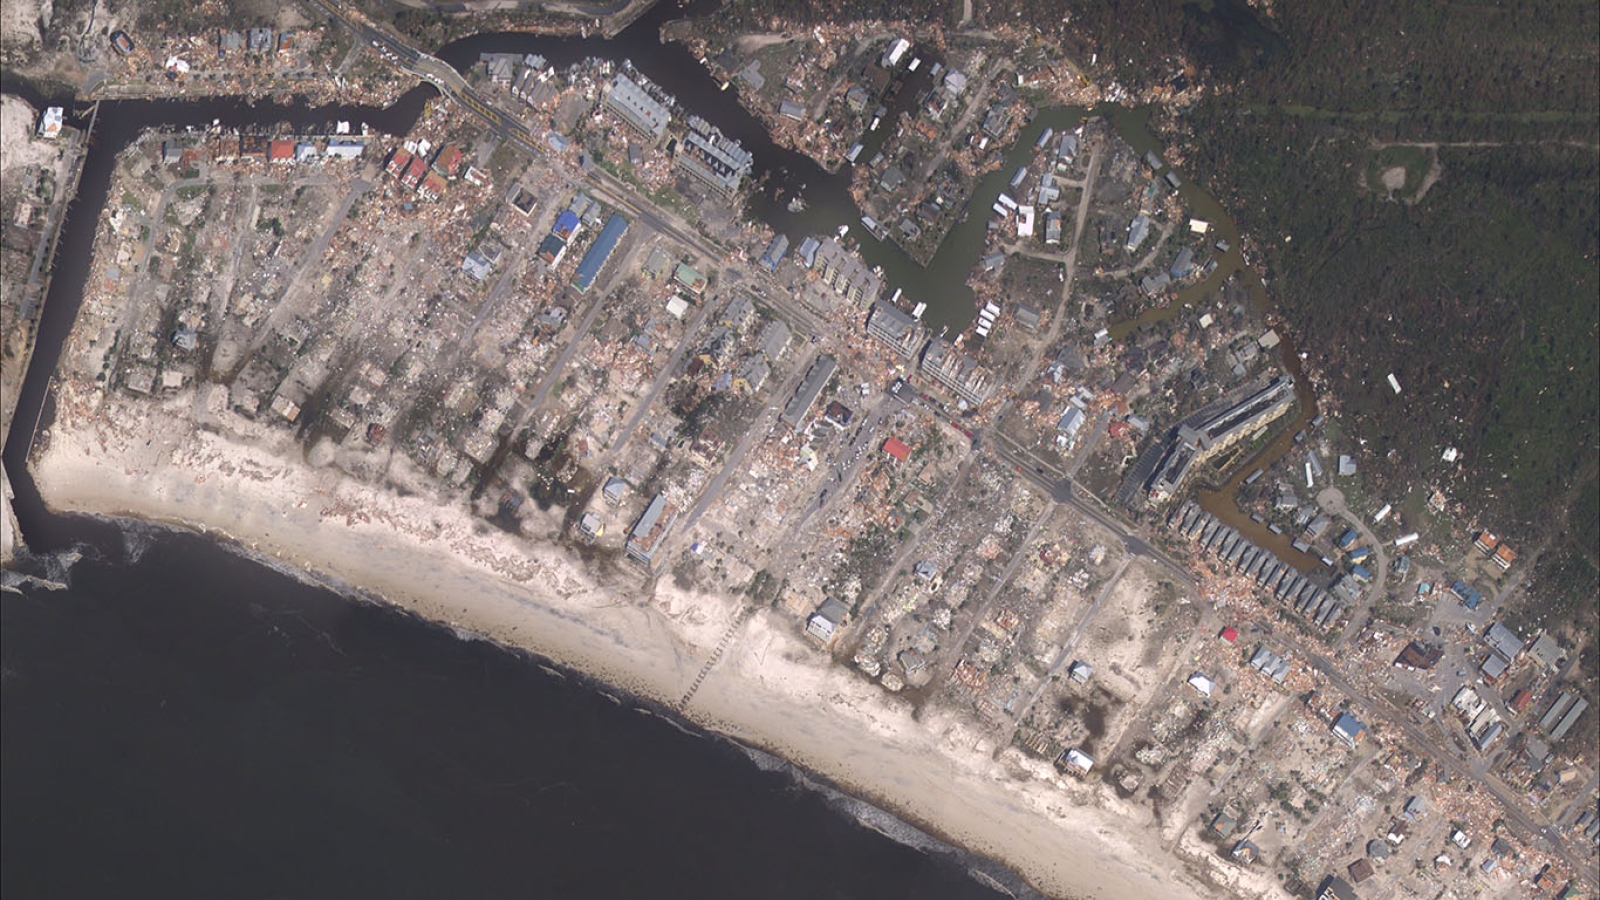 This image shows Mexico Beach, FL, after it sustained damage from Hurricane Michael in 2018. It was taken through NOAA’s Emergency Remote Sensing program. Satellites could provide similar information after more incidents. (Image courtesy of NOAA.)